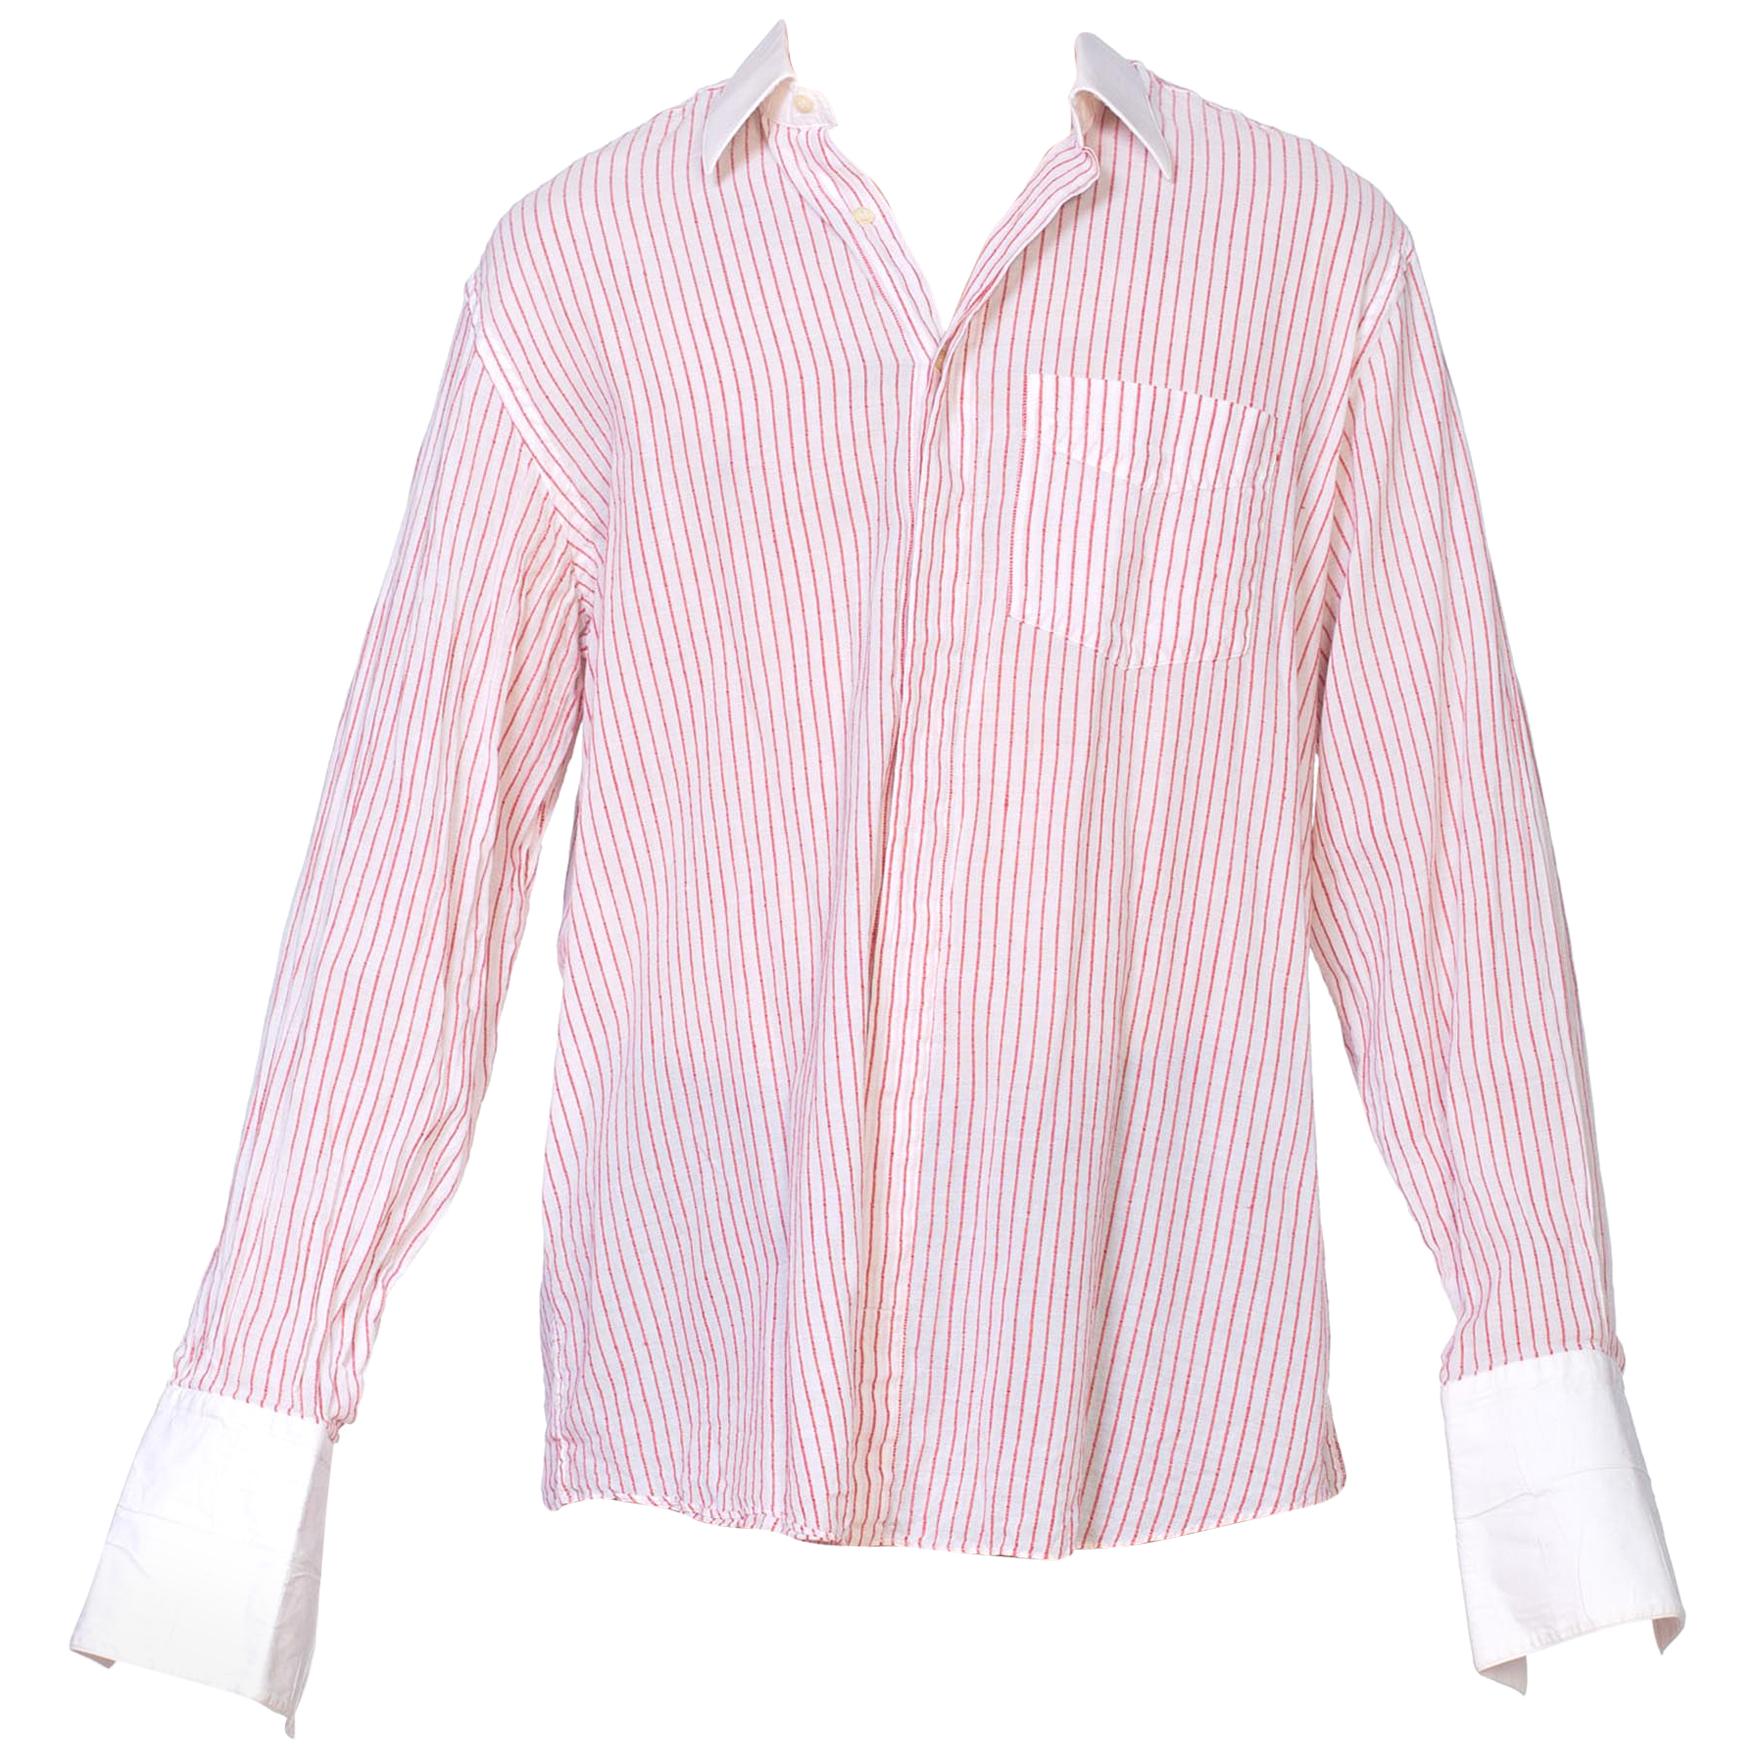 1970'S ARTIOLI Red & White Cotton Bespoke Men's  Shirt With French Cuffs For Sale